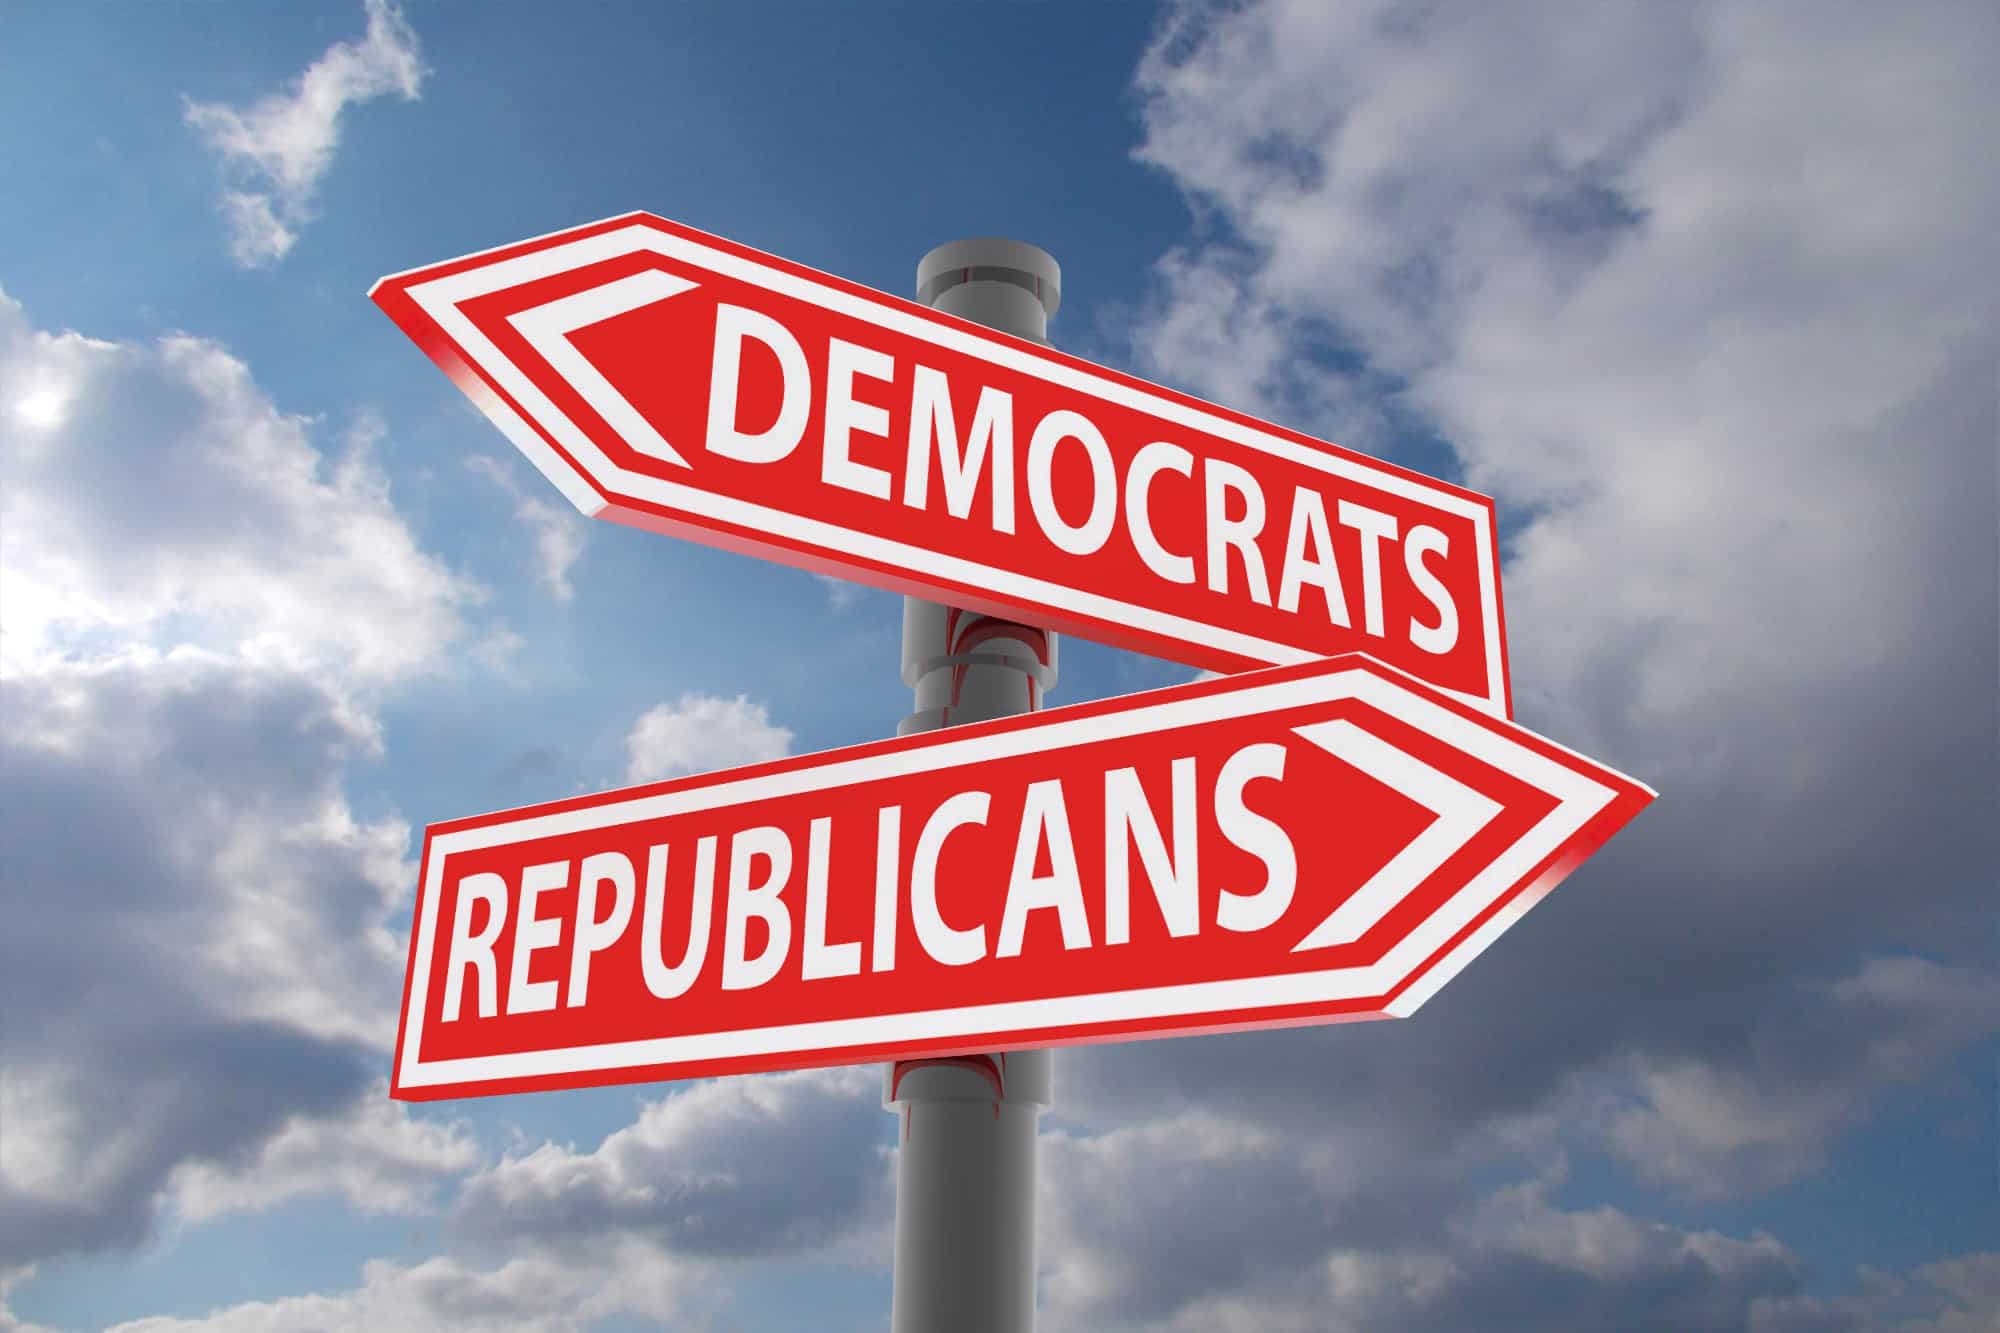 Divided Government - Democrats to left, Republicans to right